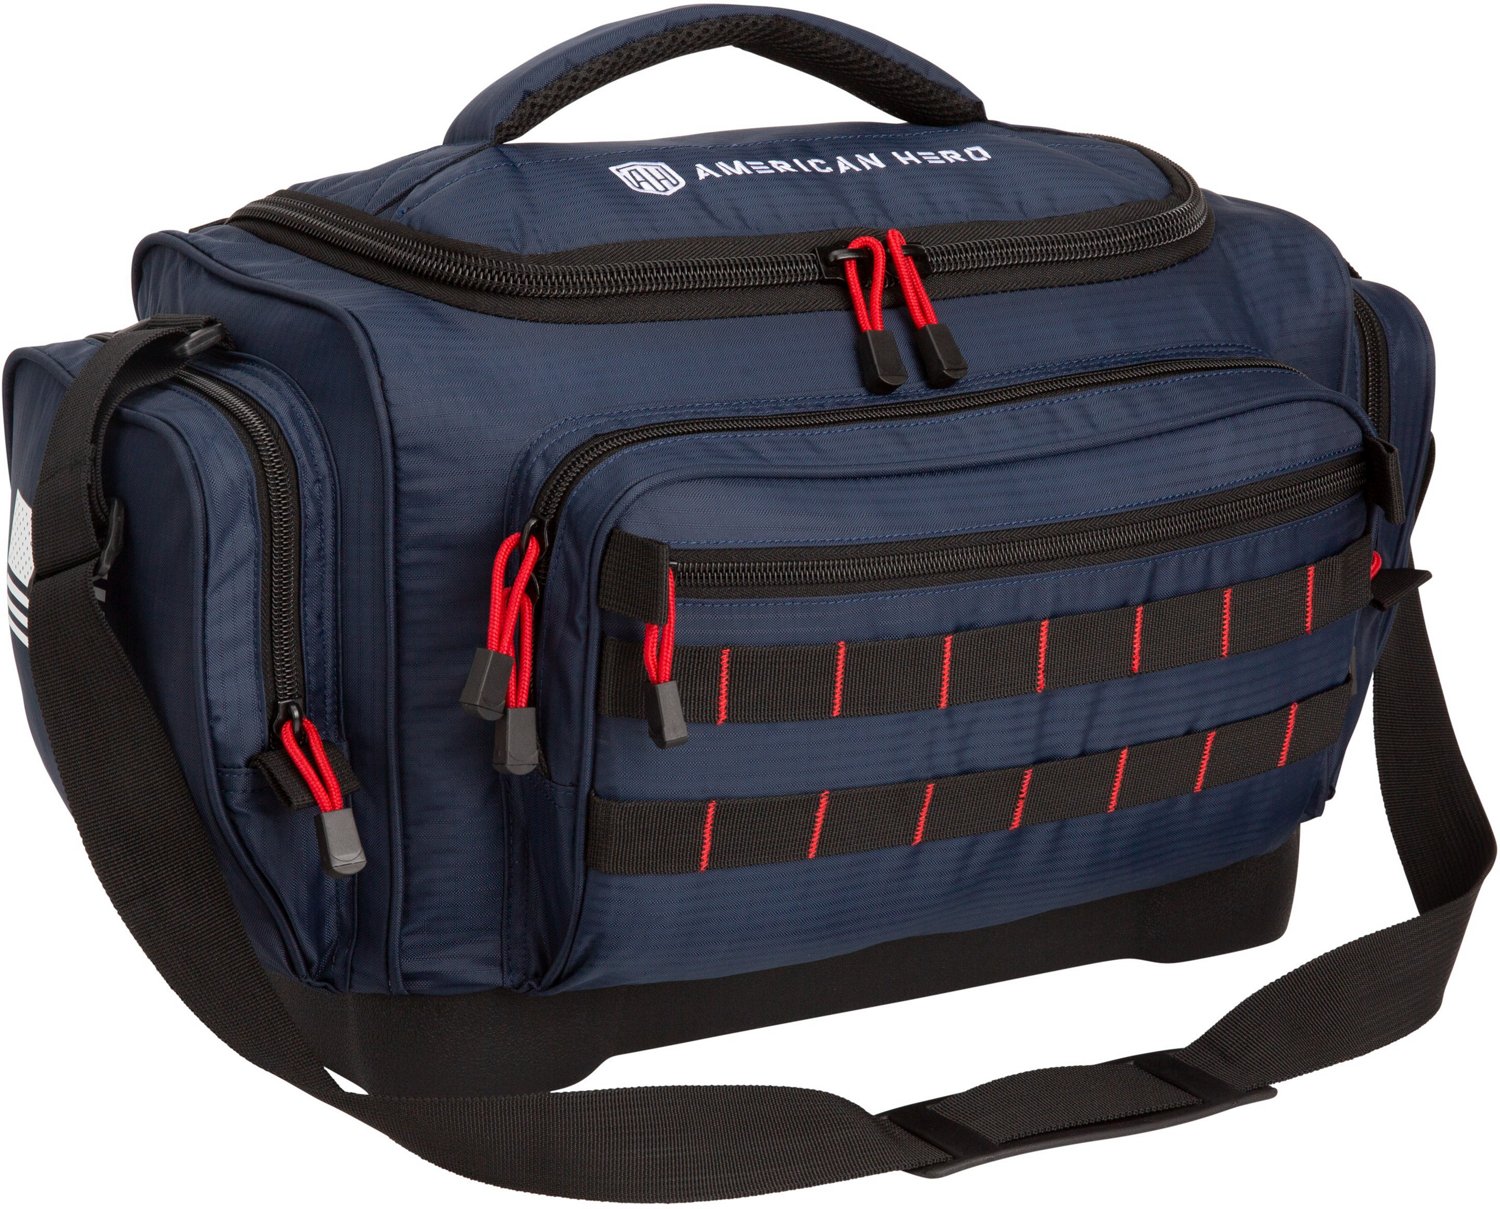 Academy Sports + Outdoors Lew's American Hero Tackle Bag